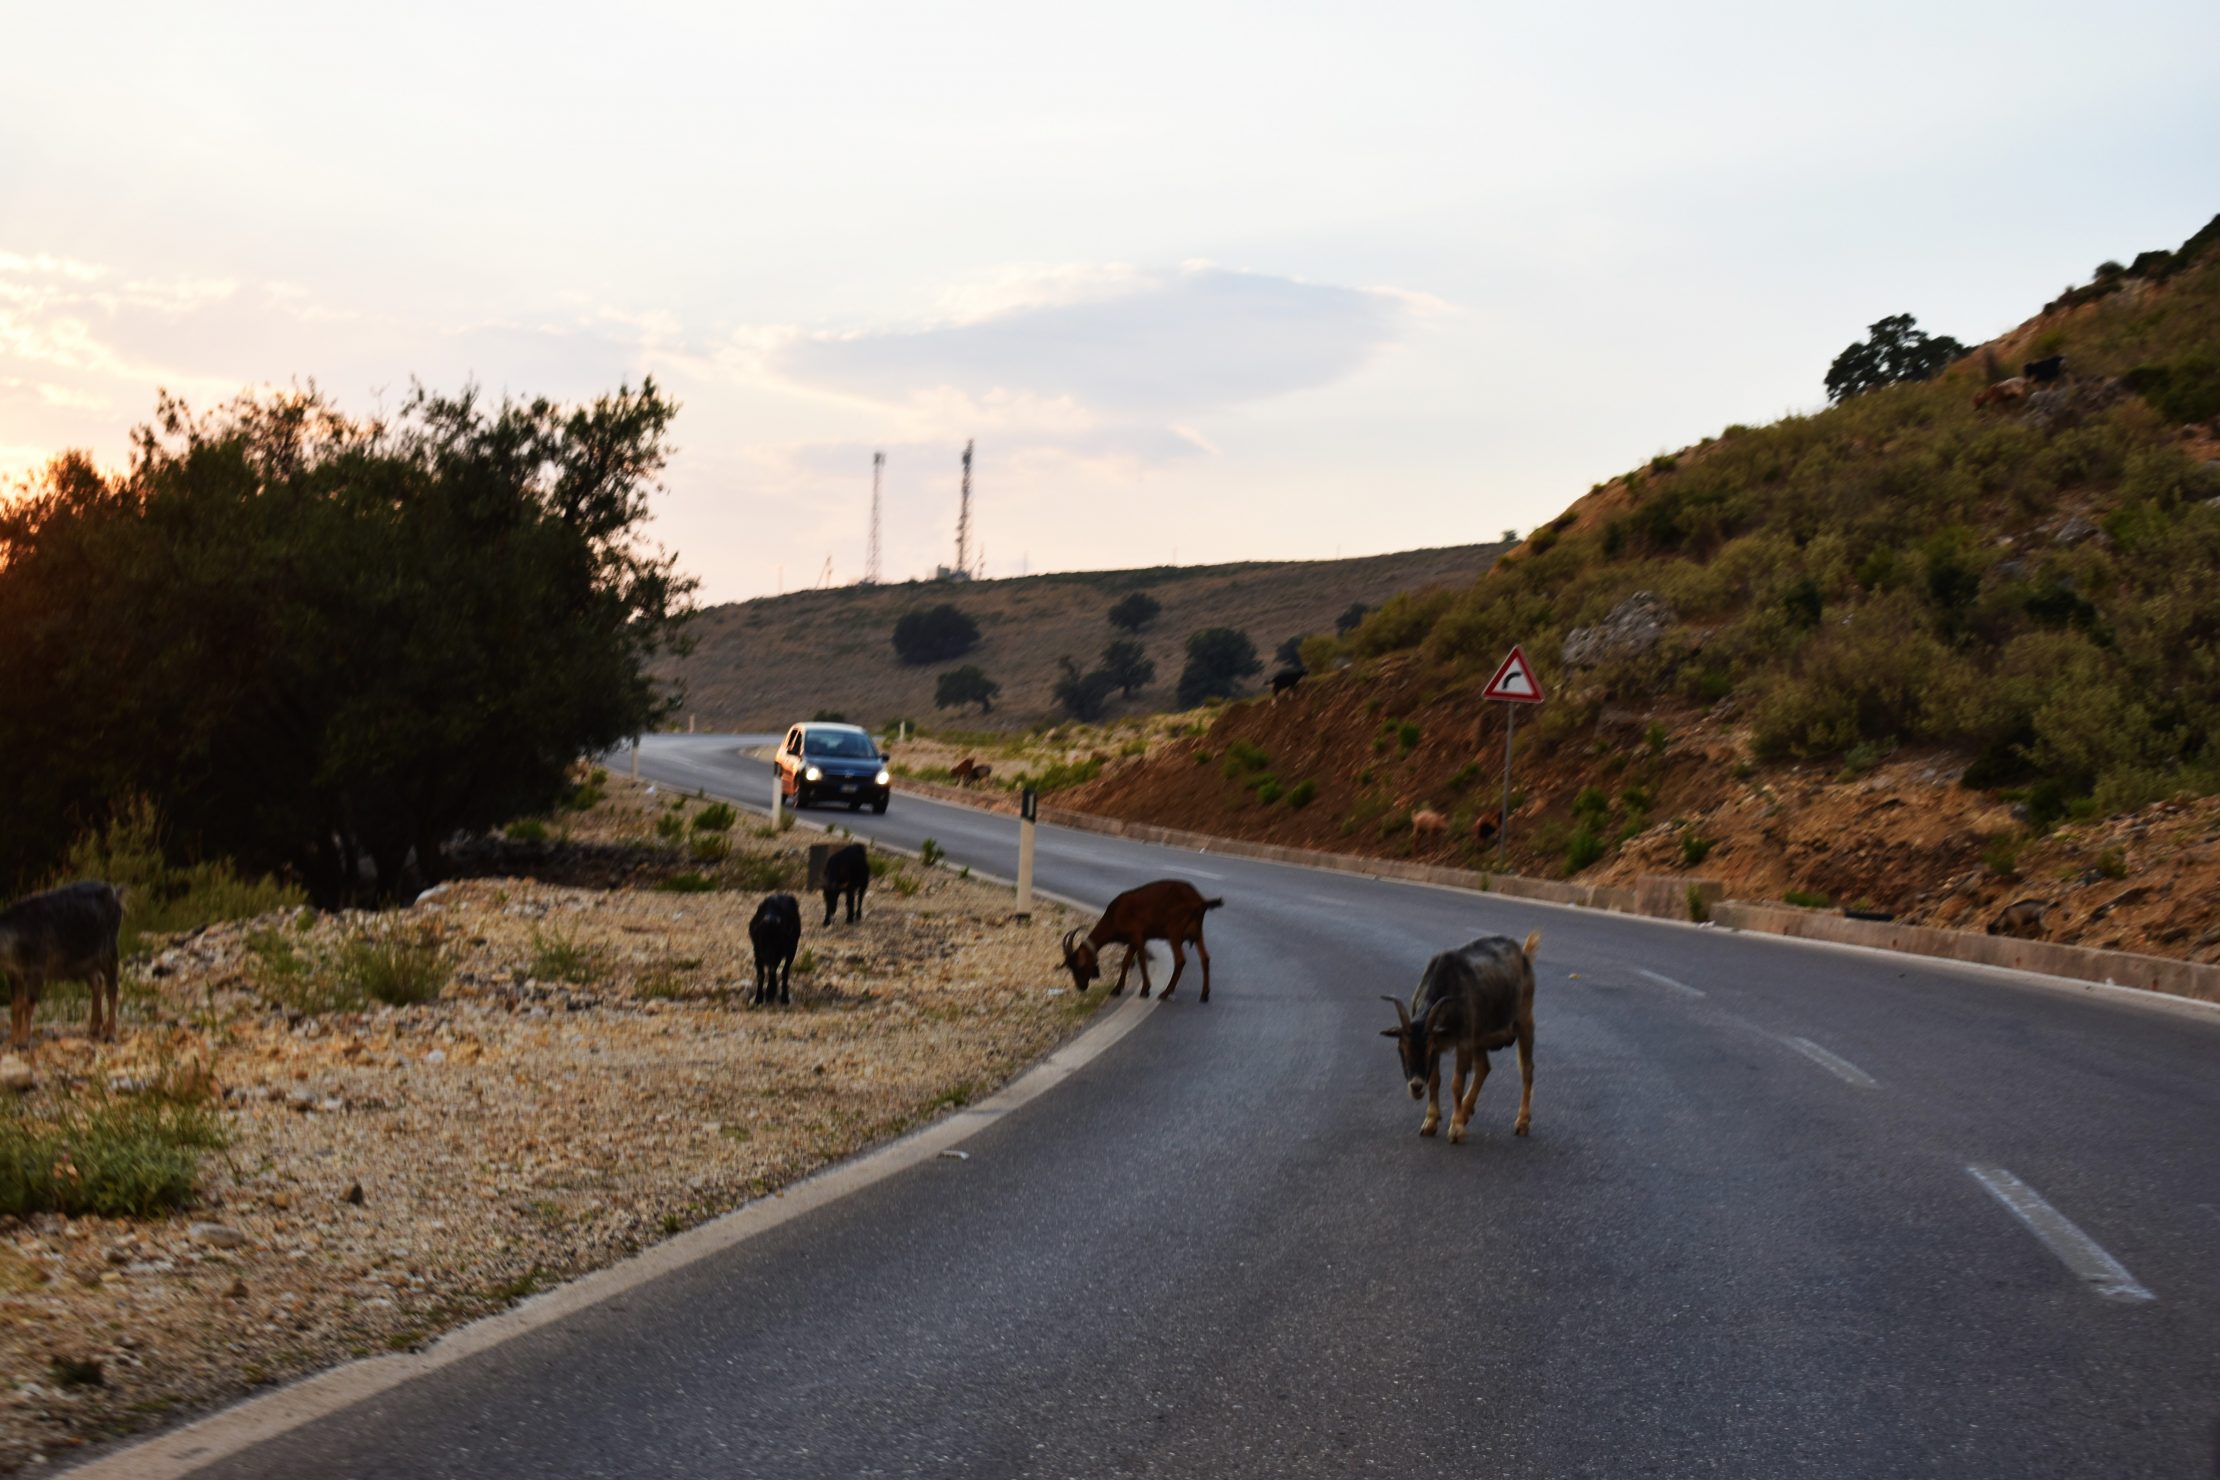 Goats on the Road - 2